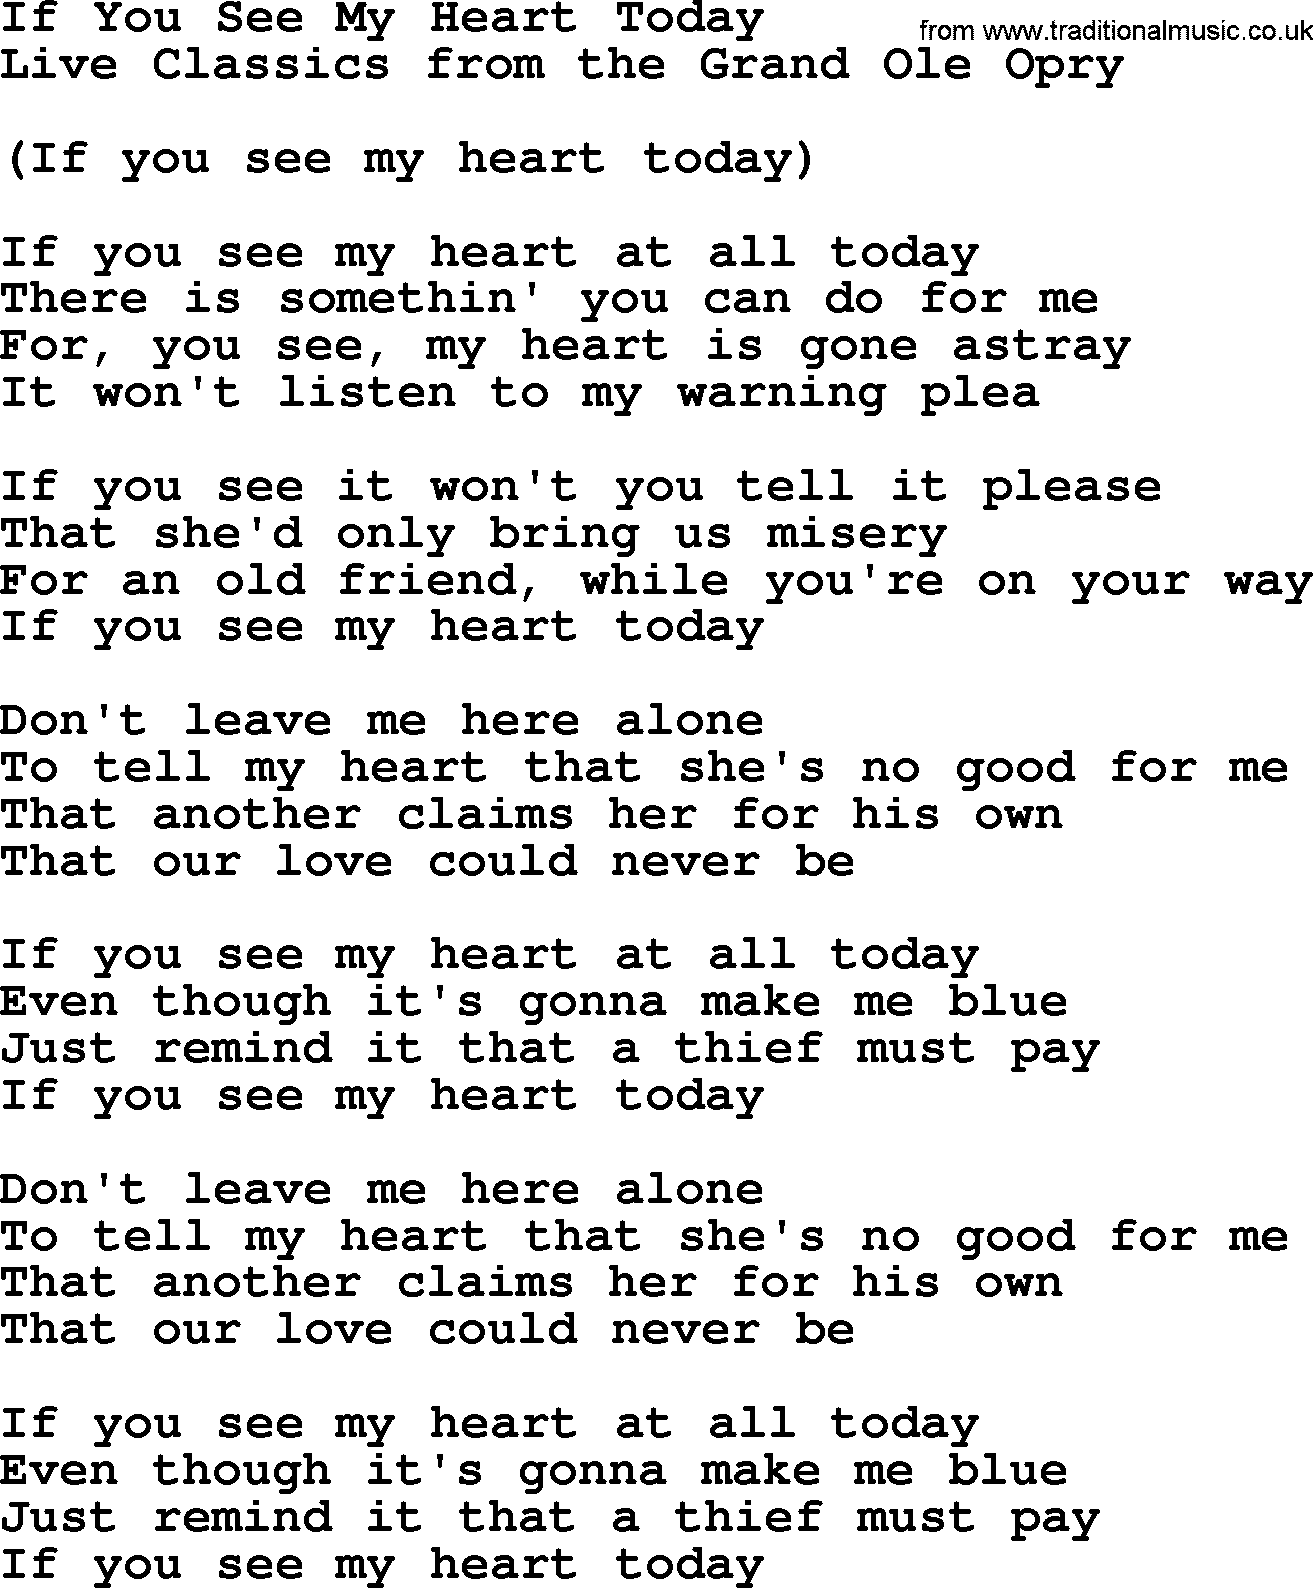 Marty Robbins song: If You See My Heart Today, lyrics